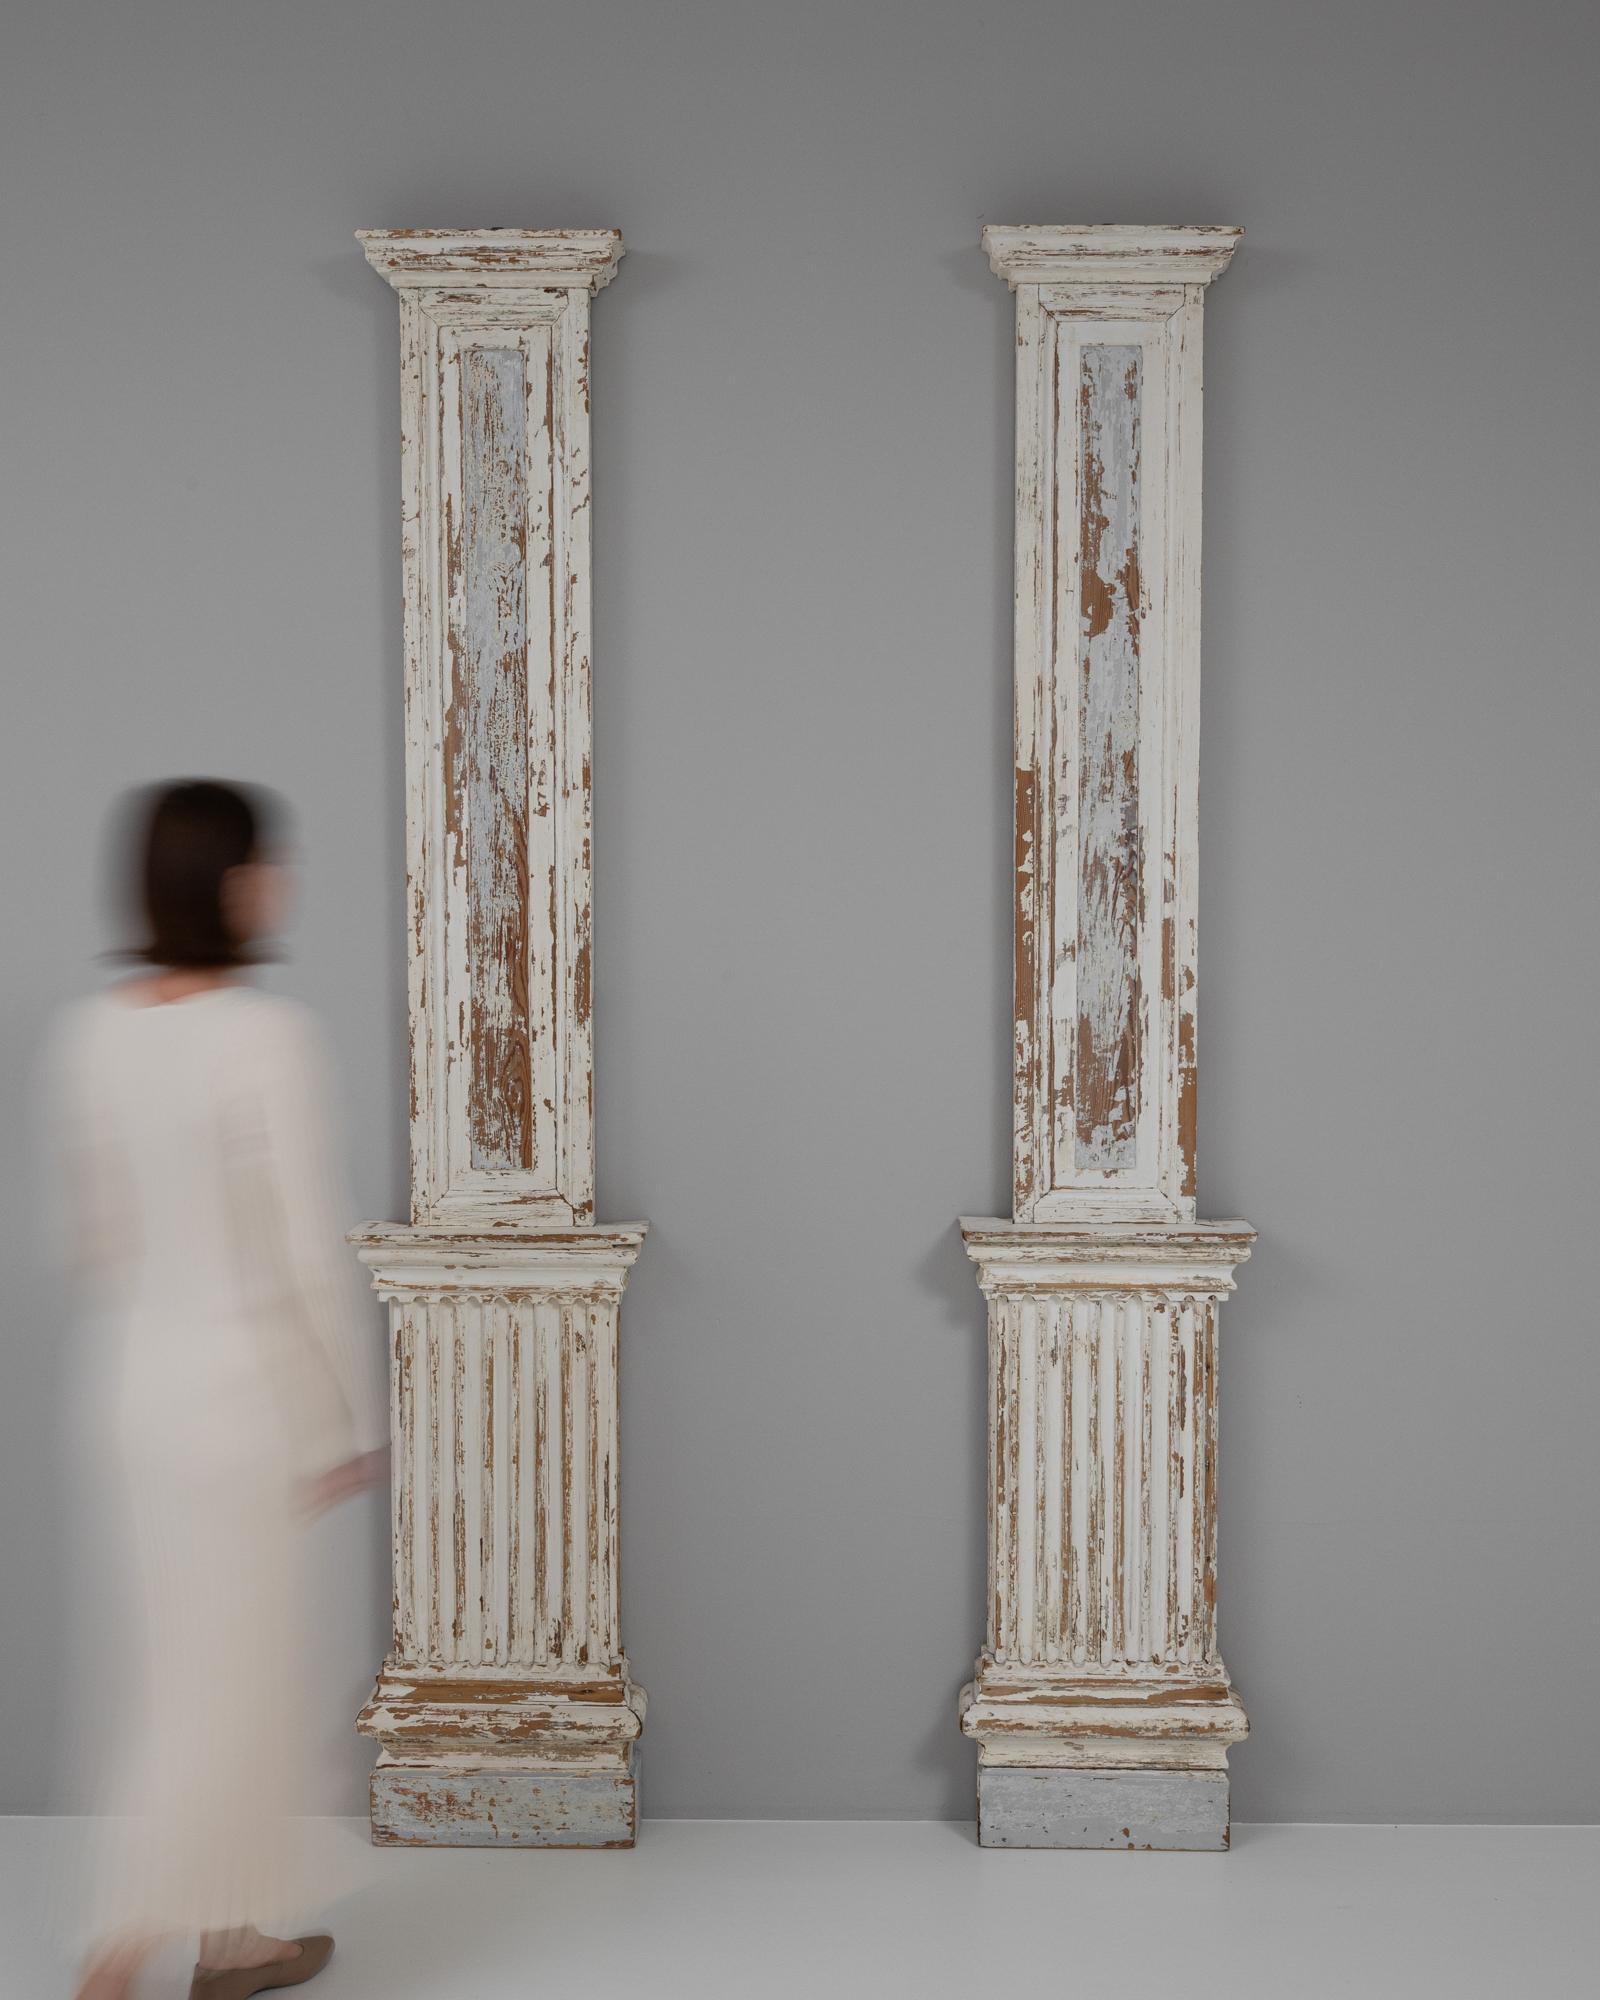 These 19th Century French Wood Columns, offered as a pair, are an exquisite find for anyone with a passion for classical architecture and vintage decor. Each column stands tall with an elegant, fluted design, topped with Corinthian capitals that